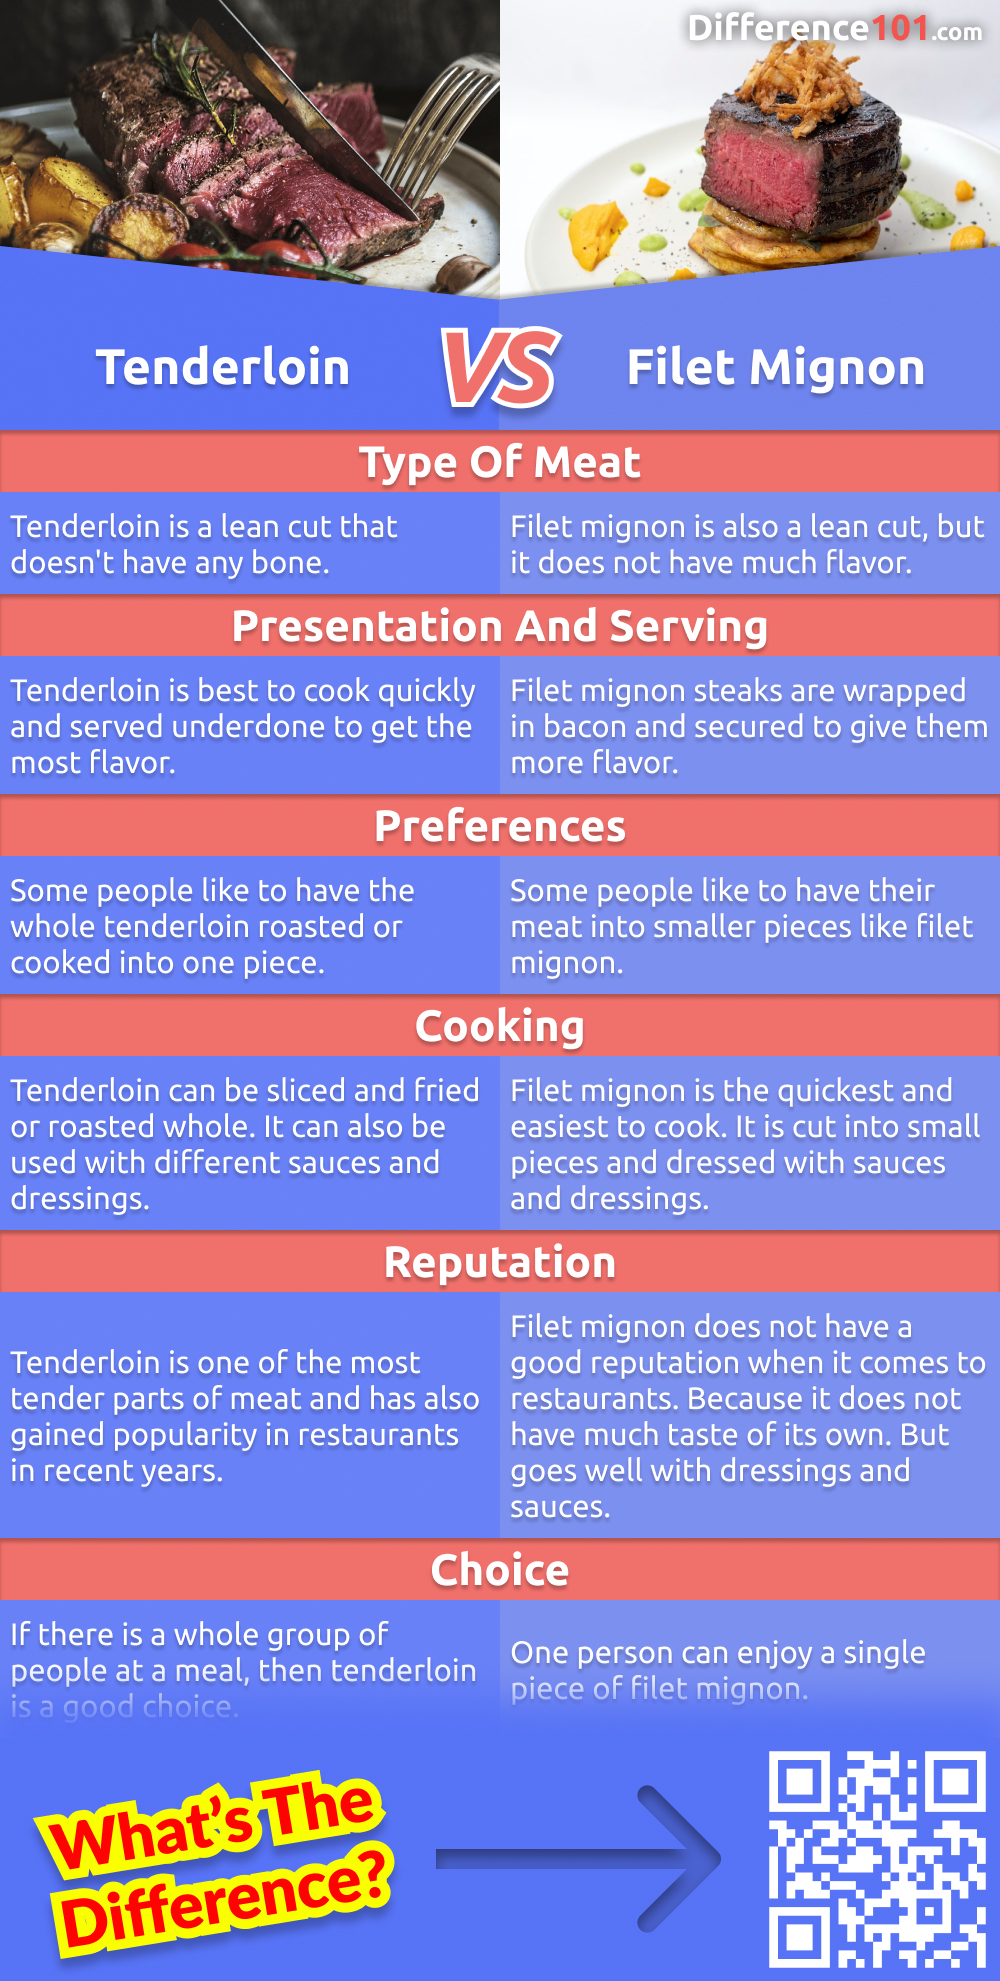 What is the difference between a tenderloin and a filet mignon? The tenderloin is leaner and flavorful, while the filet mignon is tenderer and expensive. Read on to learn more about their pros, cons and differences.